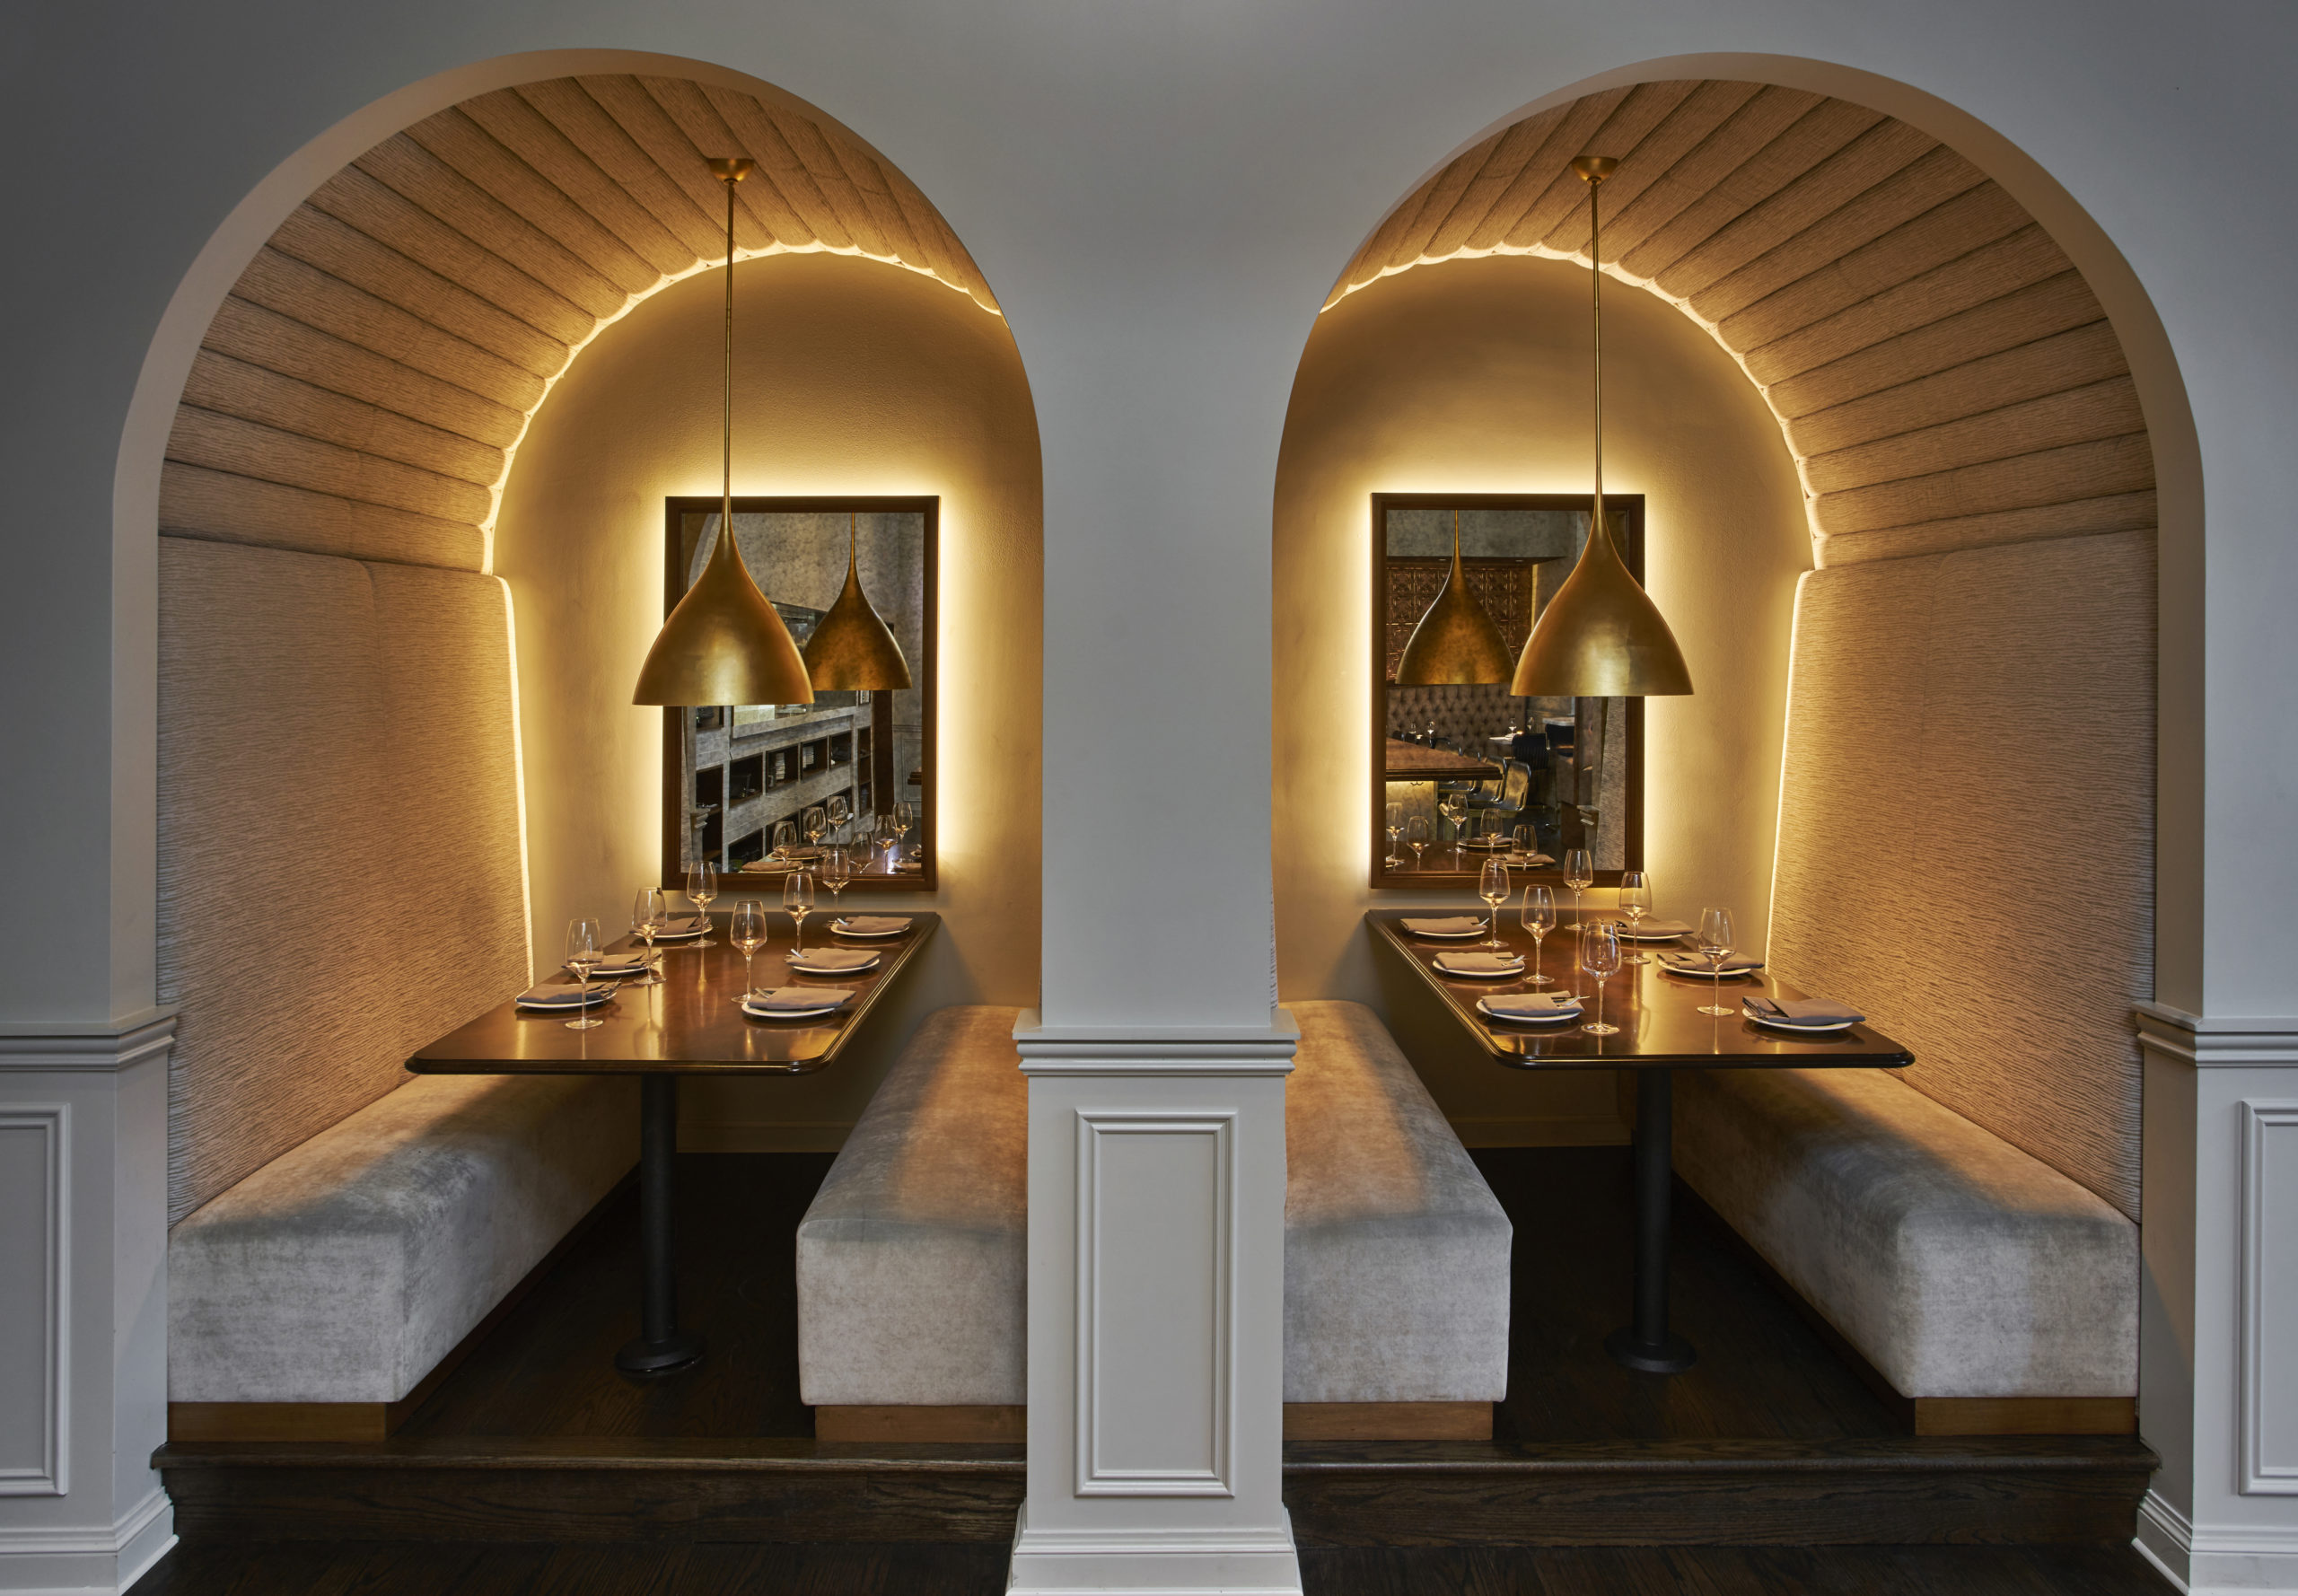 architectural lighting design in arches over dining tables